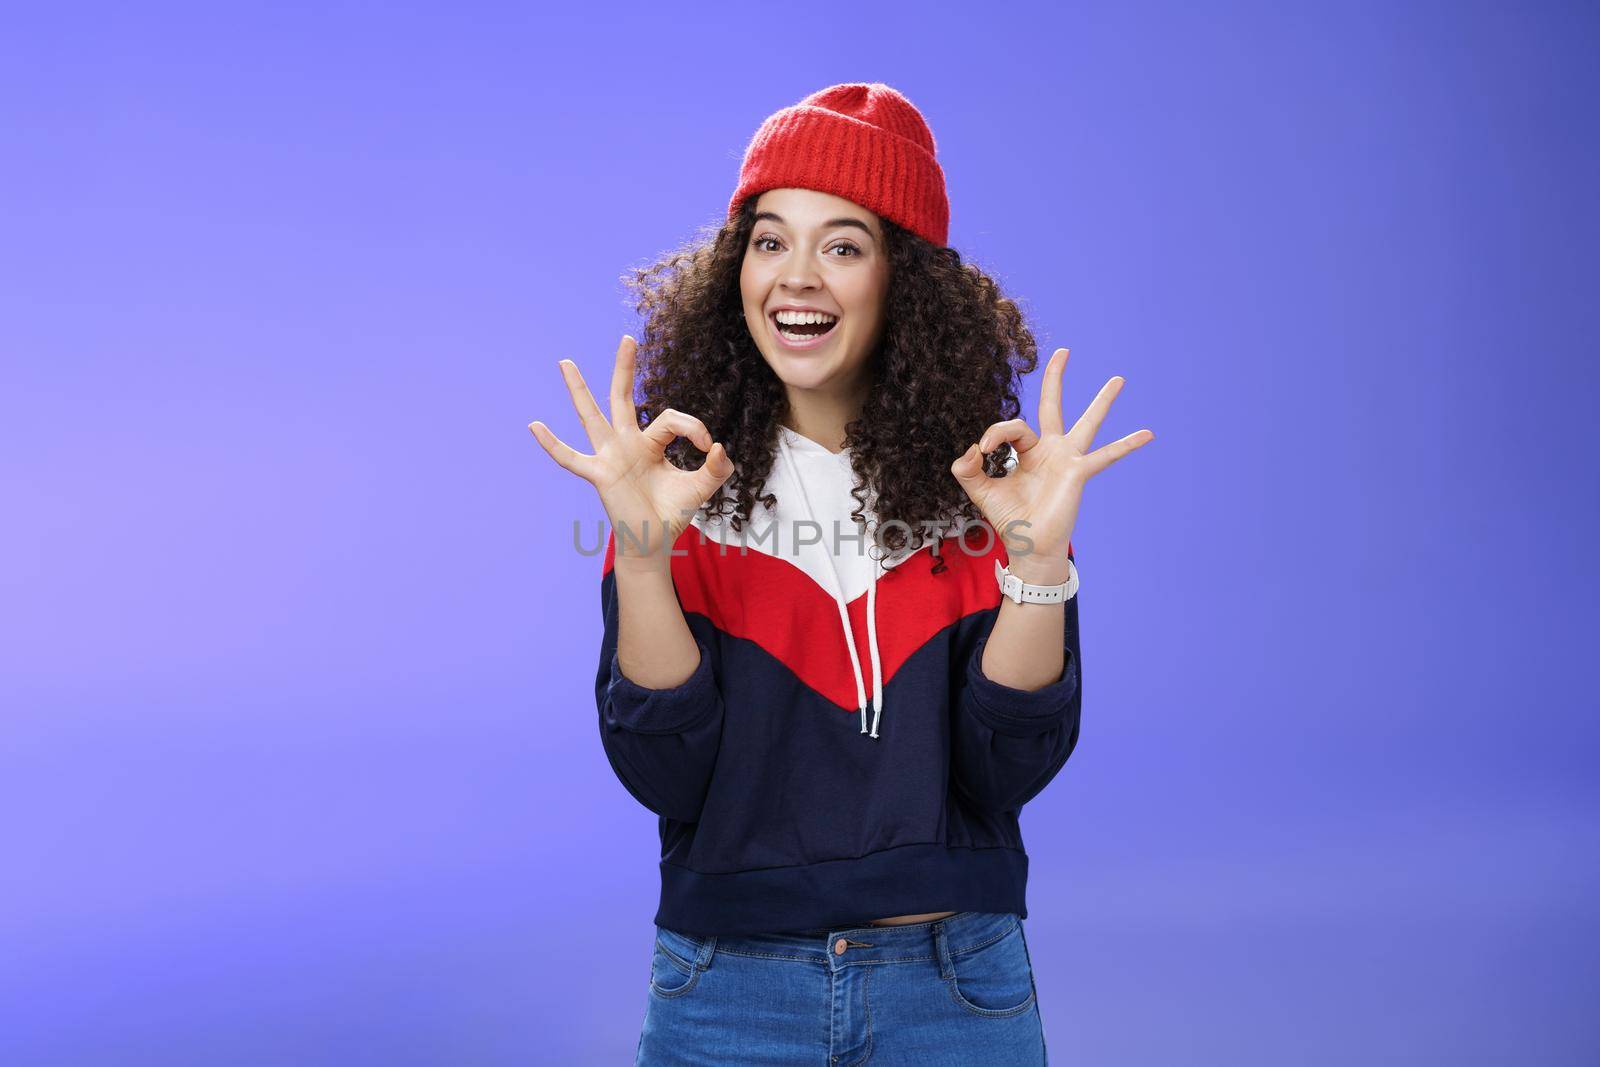 Got under control. Portrait of happy charming smiling curly-haired female in warm winter hat and sweatshirt smiling broadly and showing okay or excellent gesture as approving, liking cool movements.